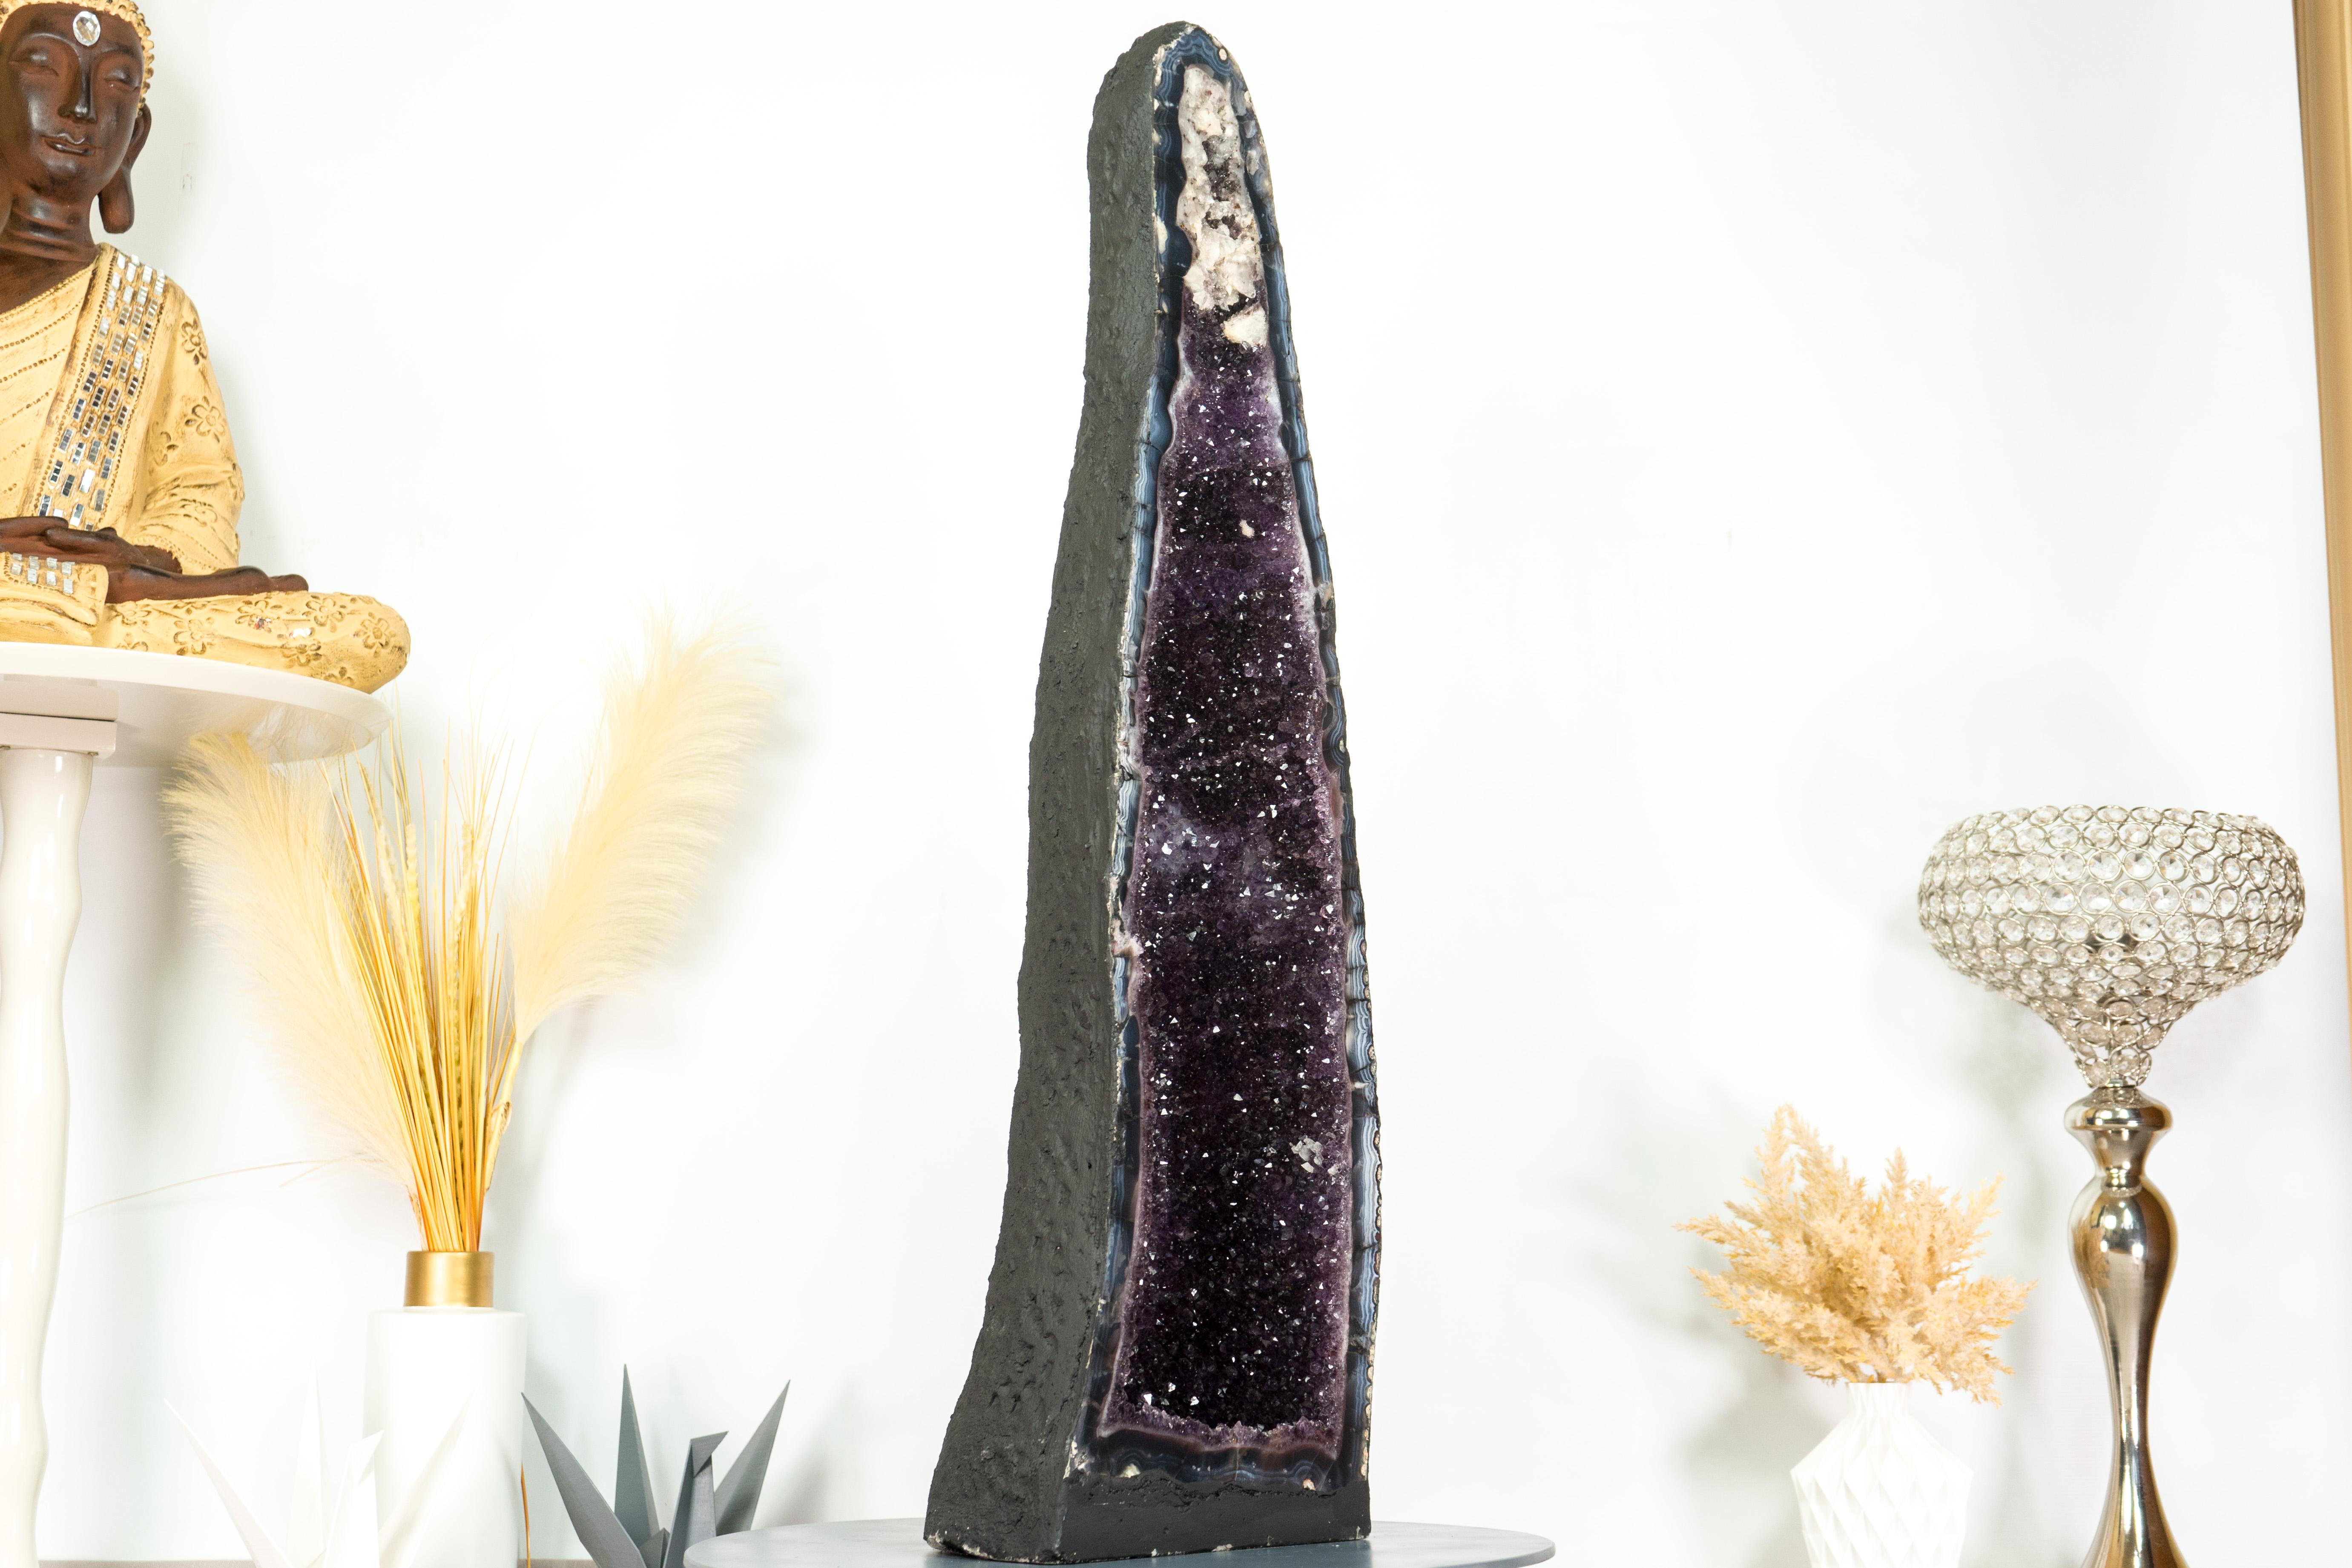 Brazilian Tall Amethyst Cathedral Geode, with Lace Agate, Purple Amethyst and Calcite For Sale